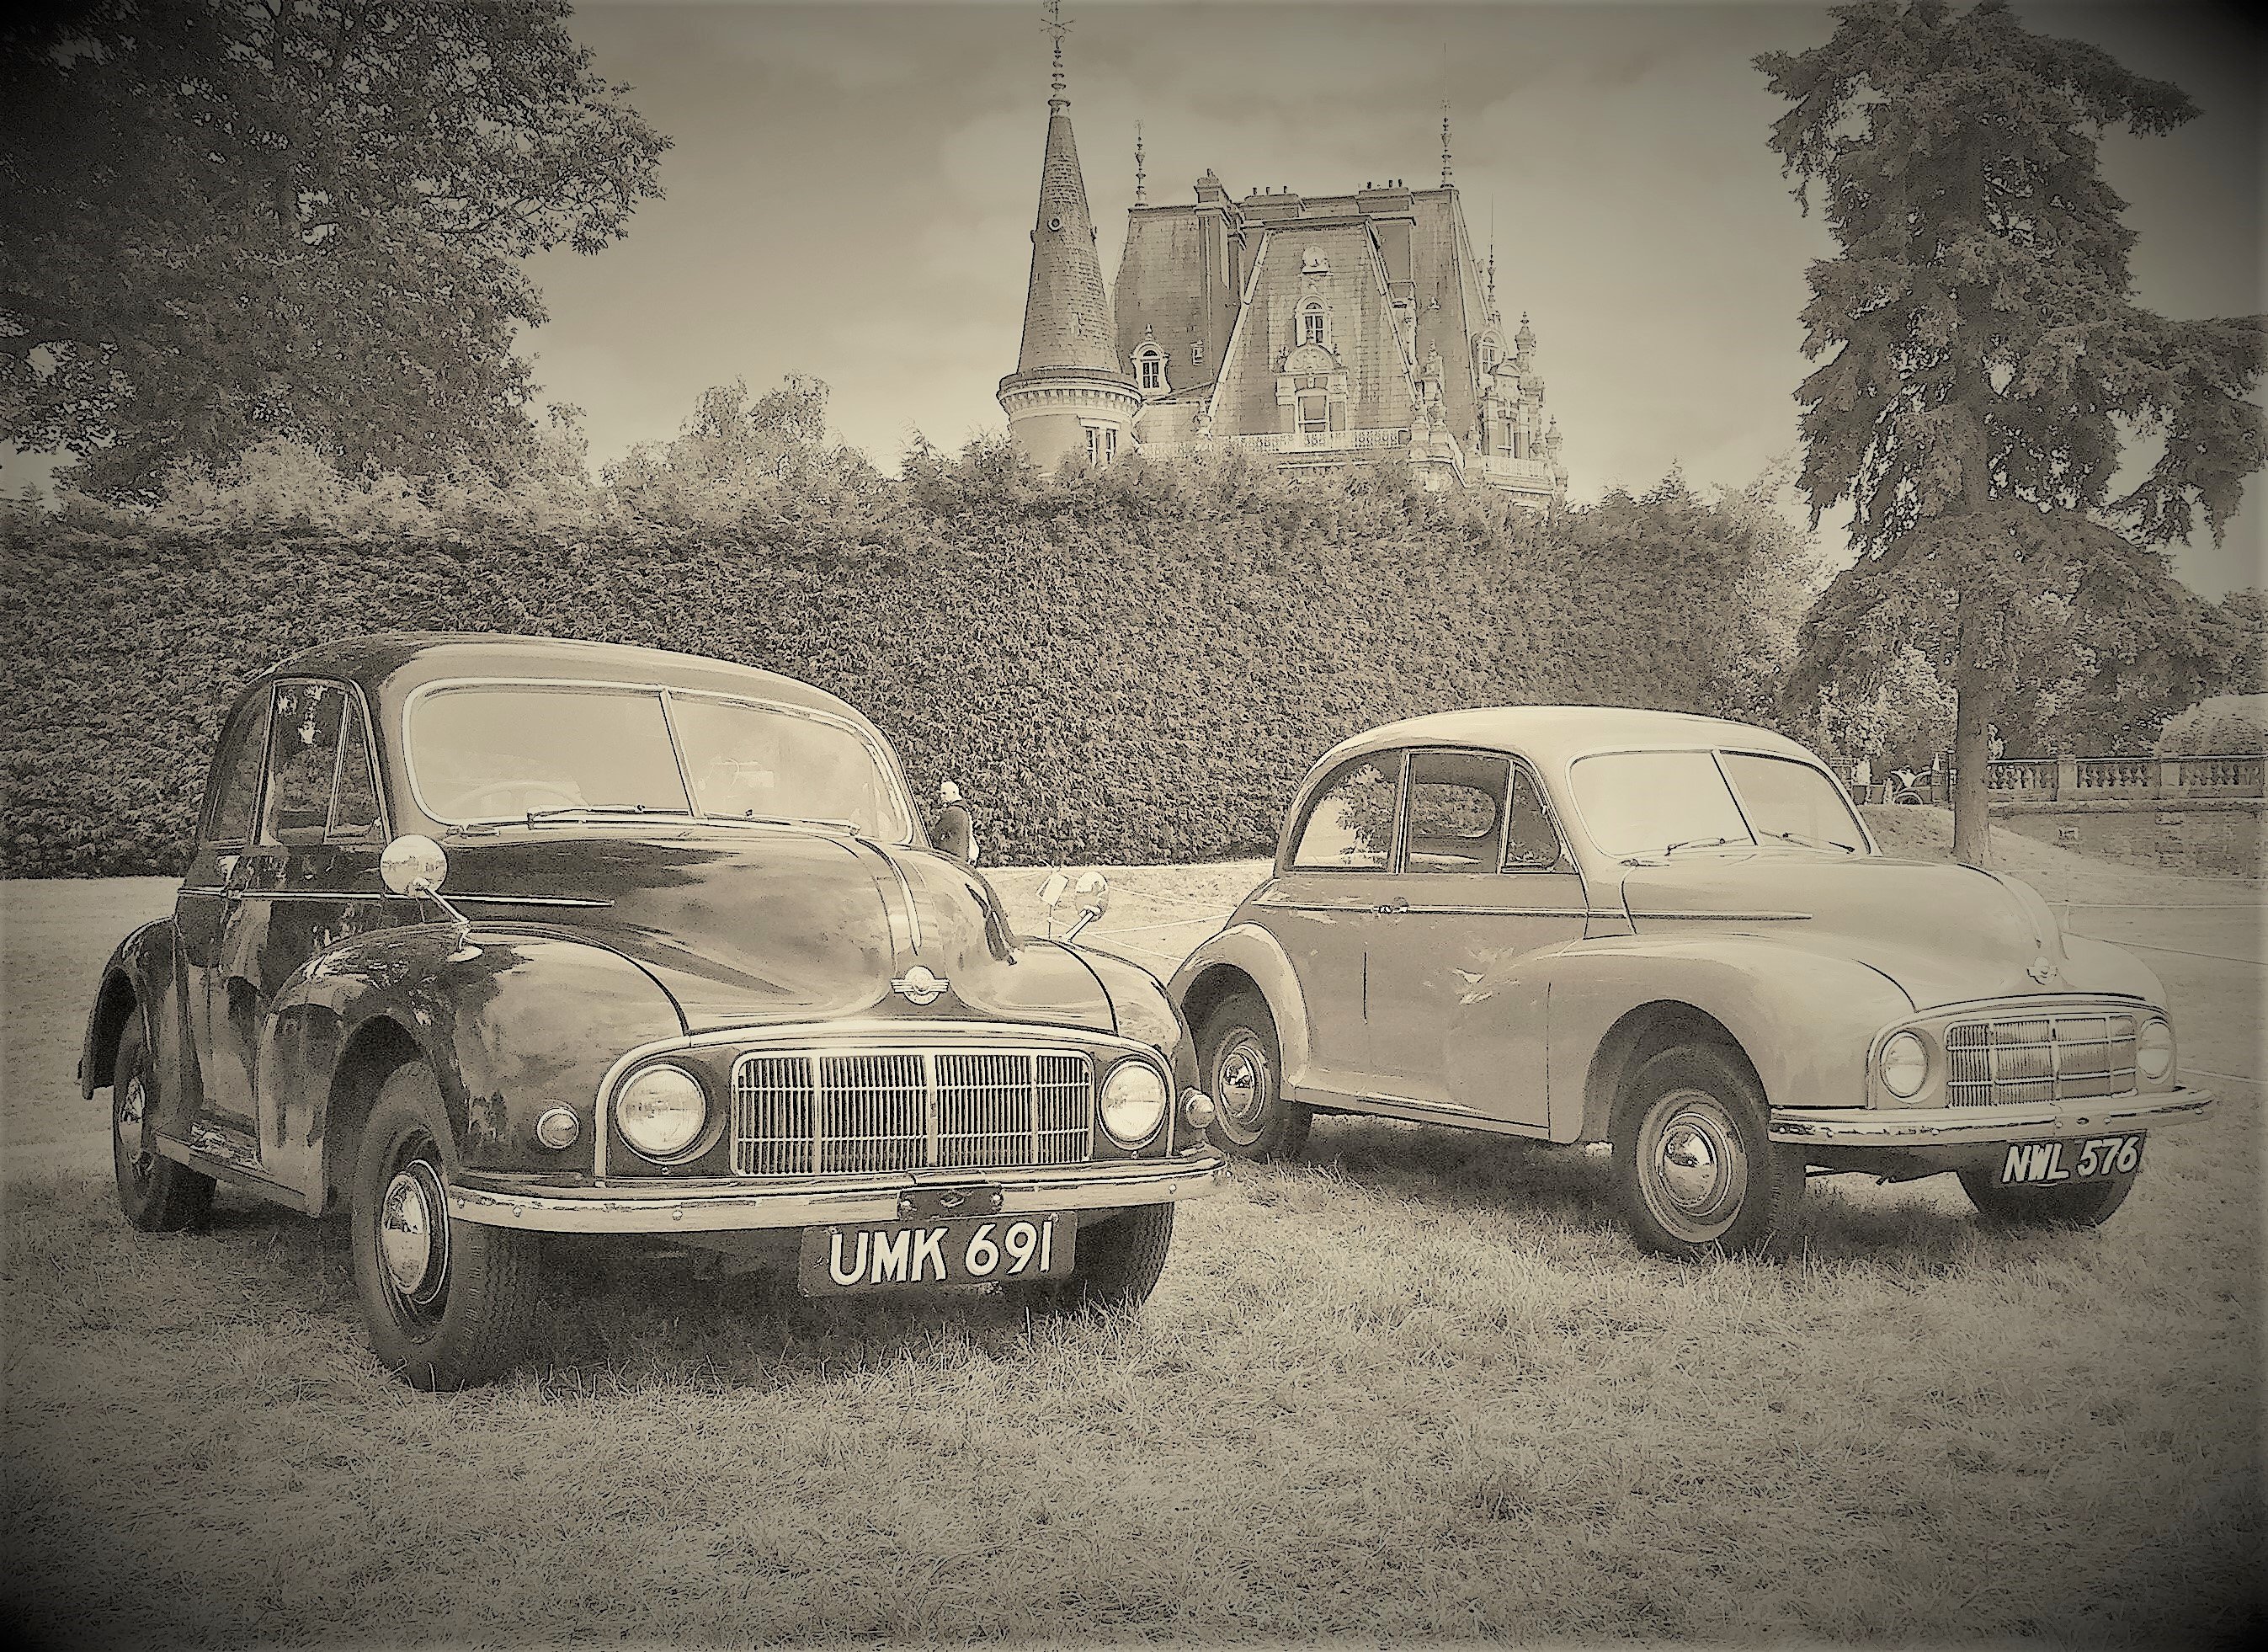 Two morris Minor Lowlights UMK 691 and NWL 691 parked together at Chateau Impney, MMOC National Rally, July 2023 (2).JPG